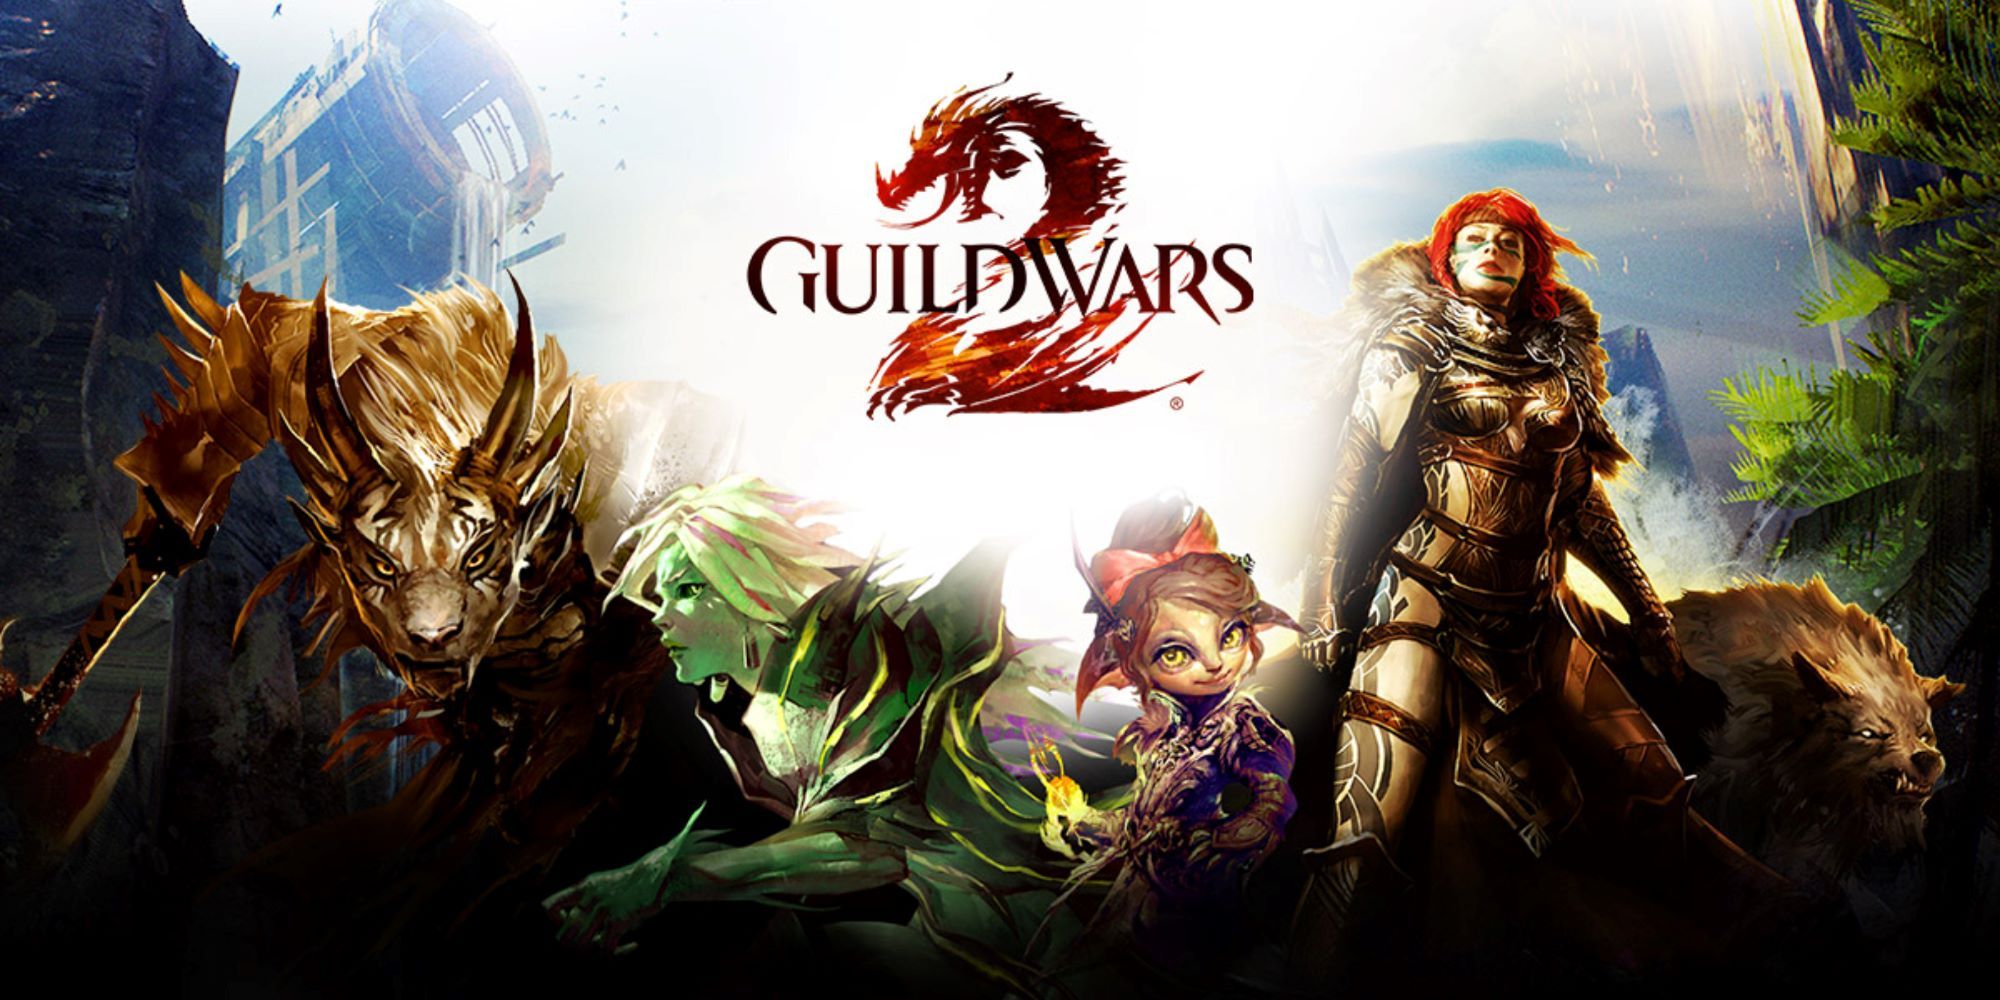 Promotional banner including logo and 5 characters of varying fantasy races 